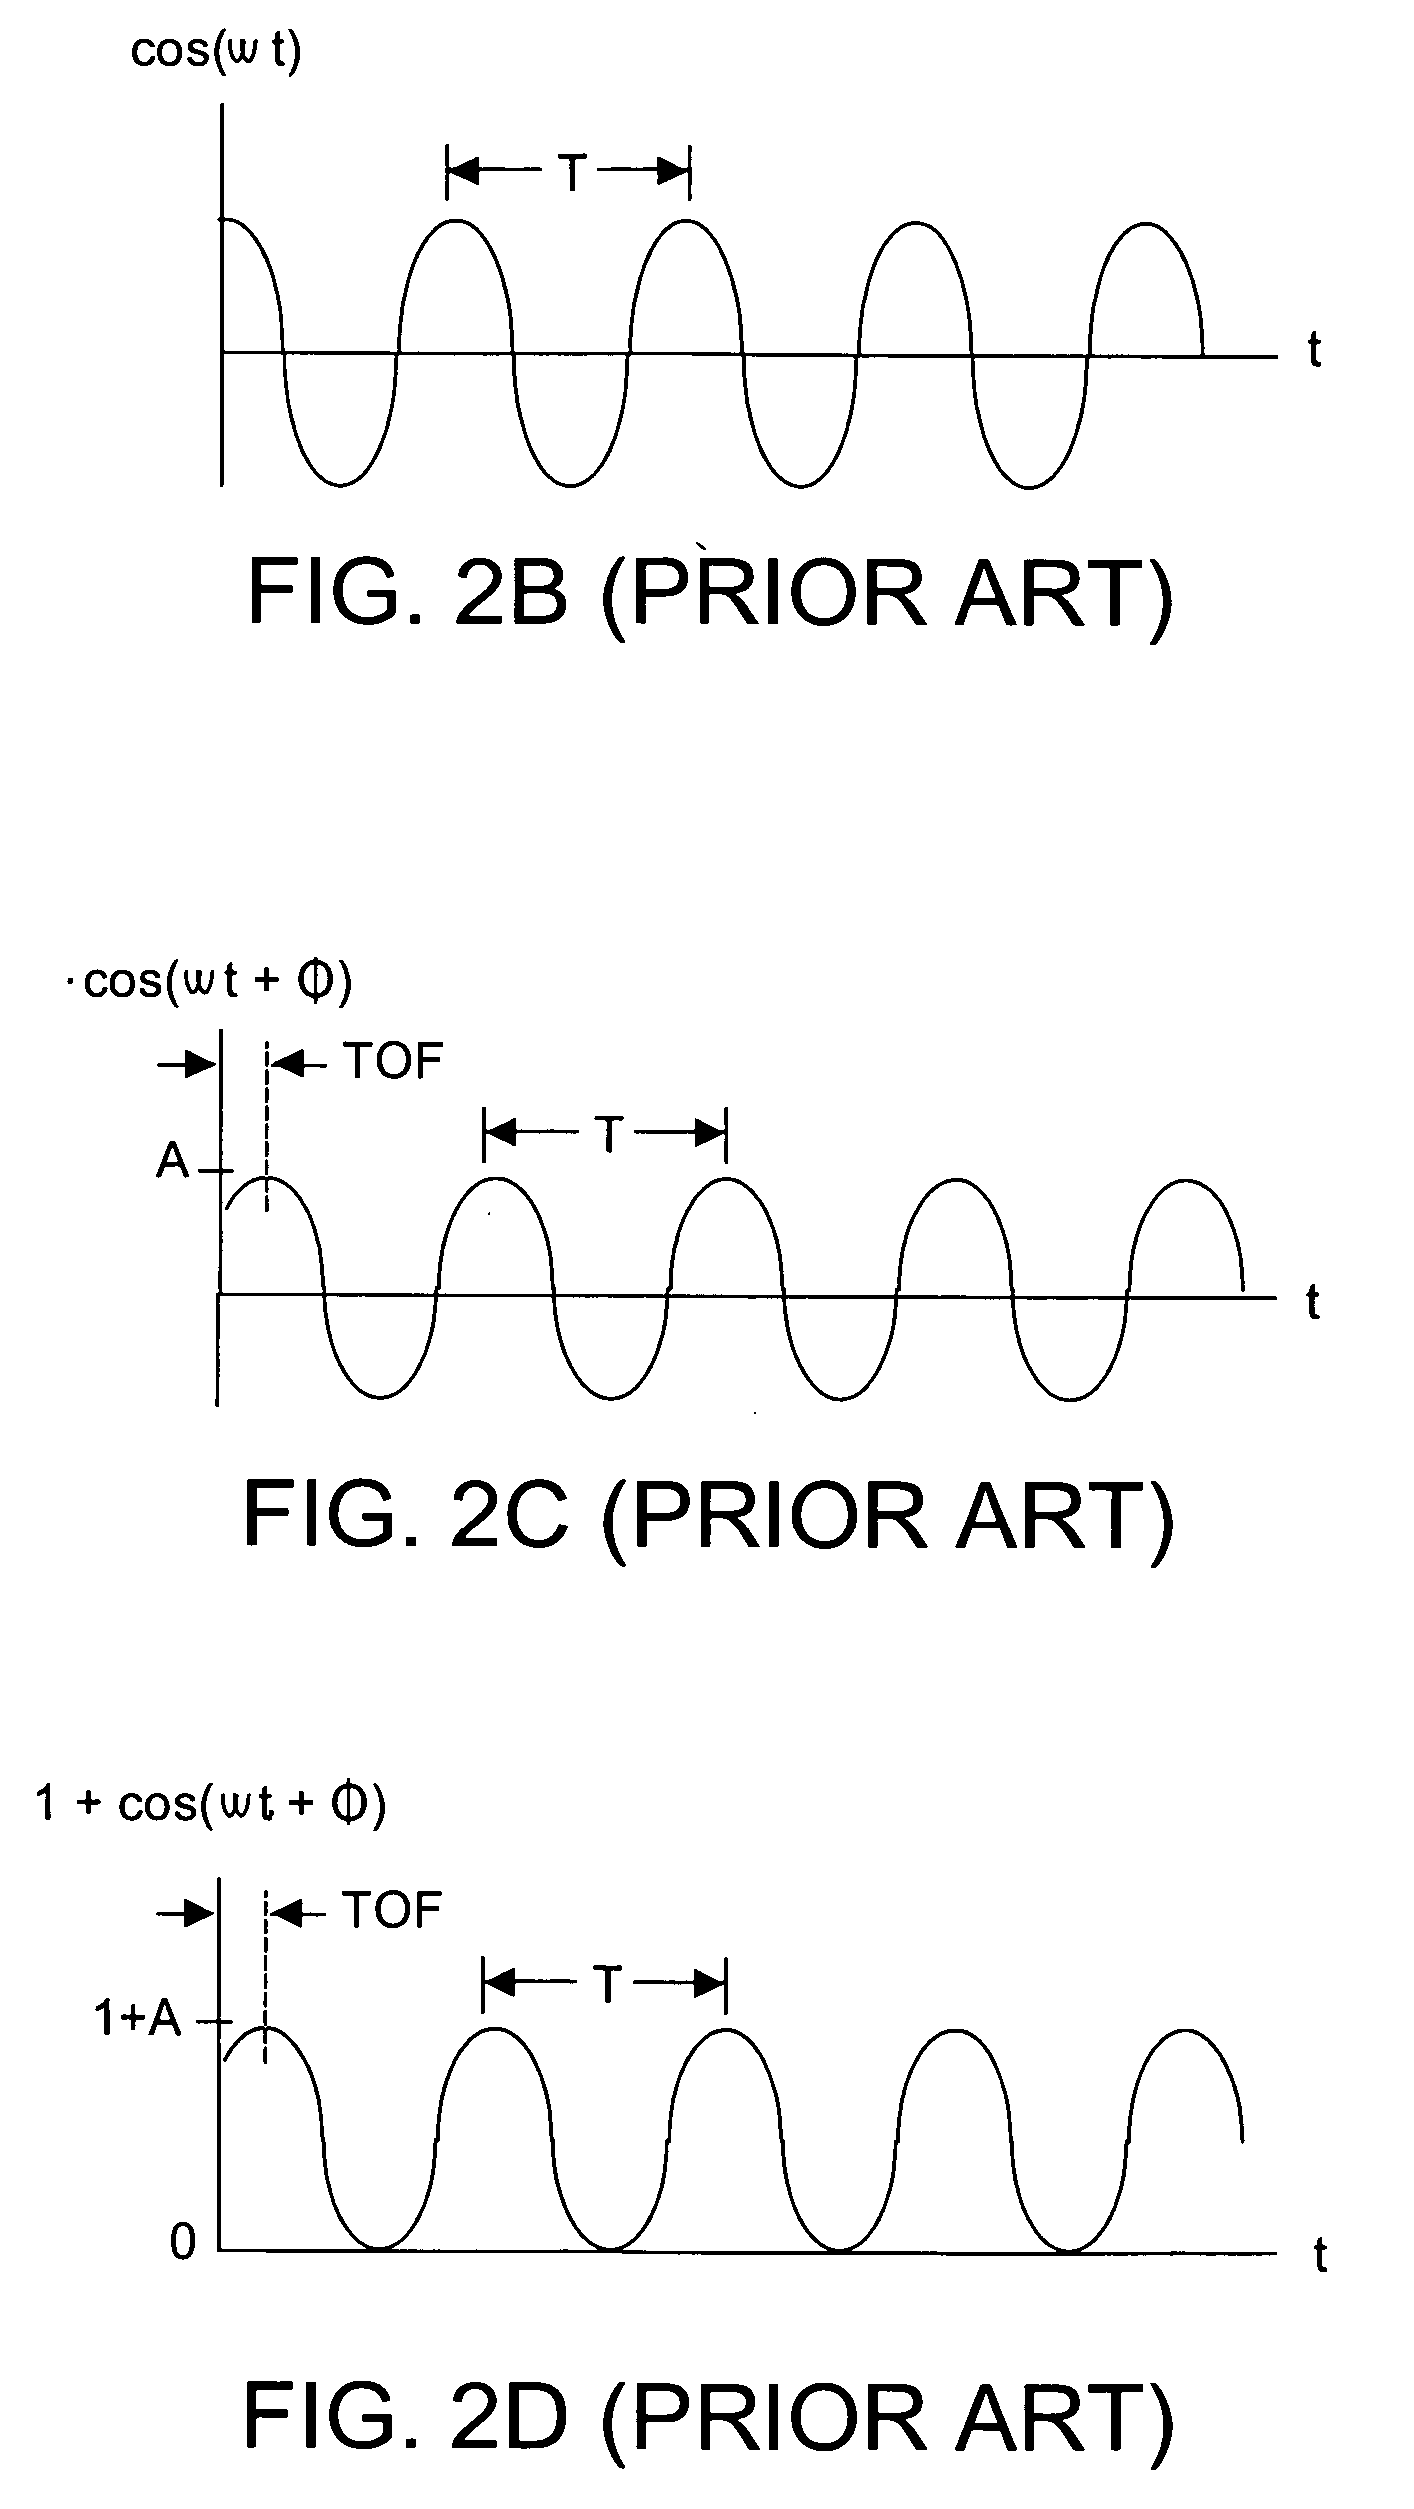 Methods and system to quantify depth data accuracy in three-dimensional sensors using single frame capture